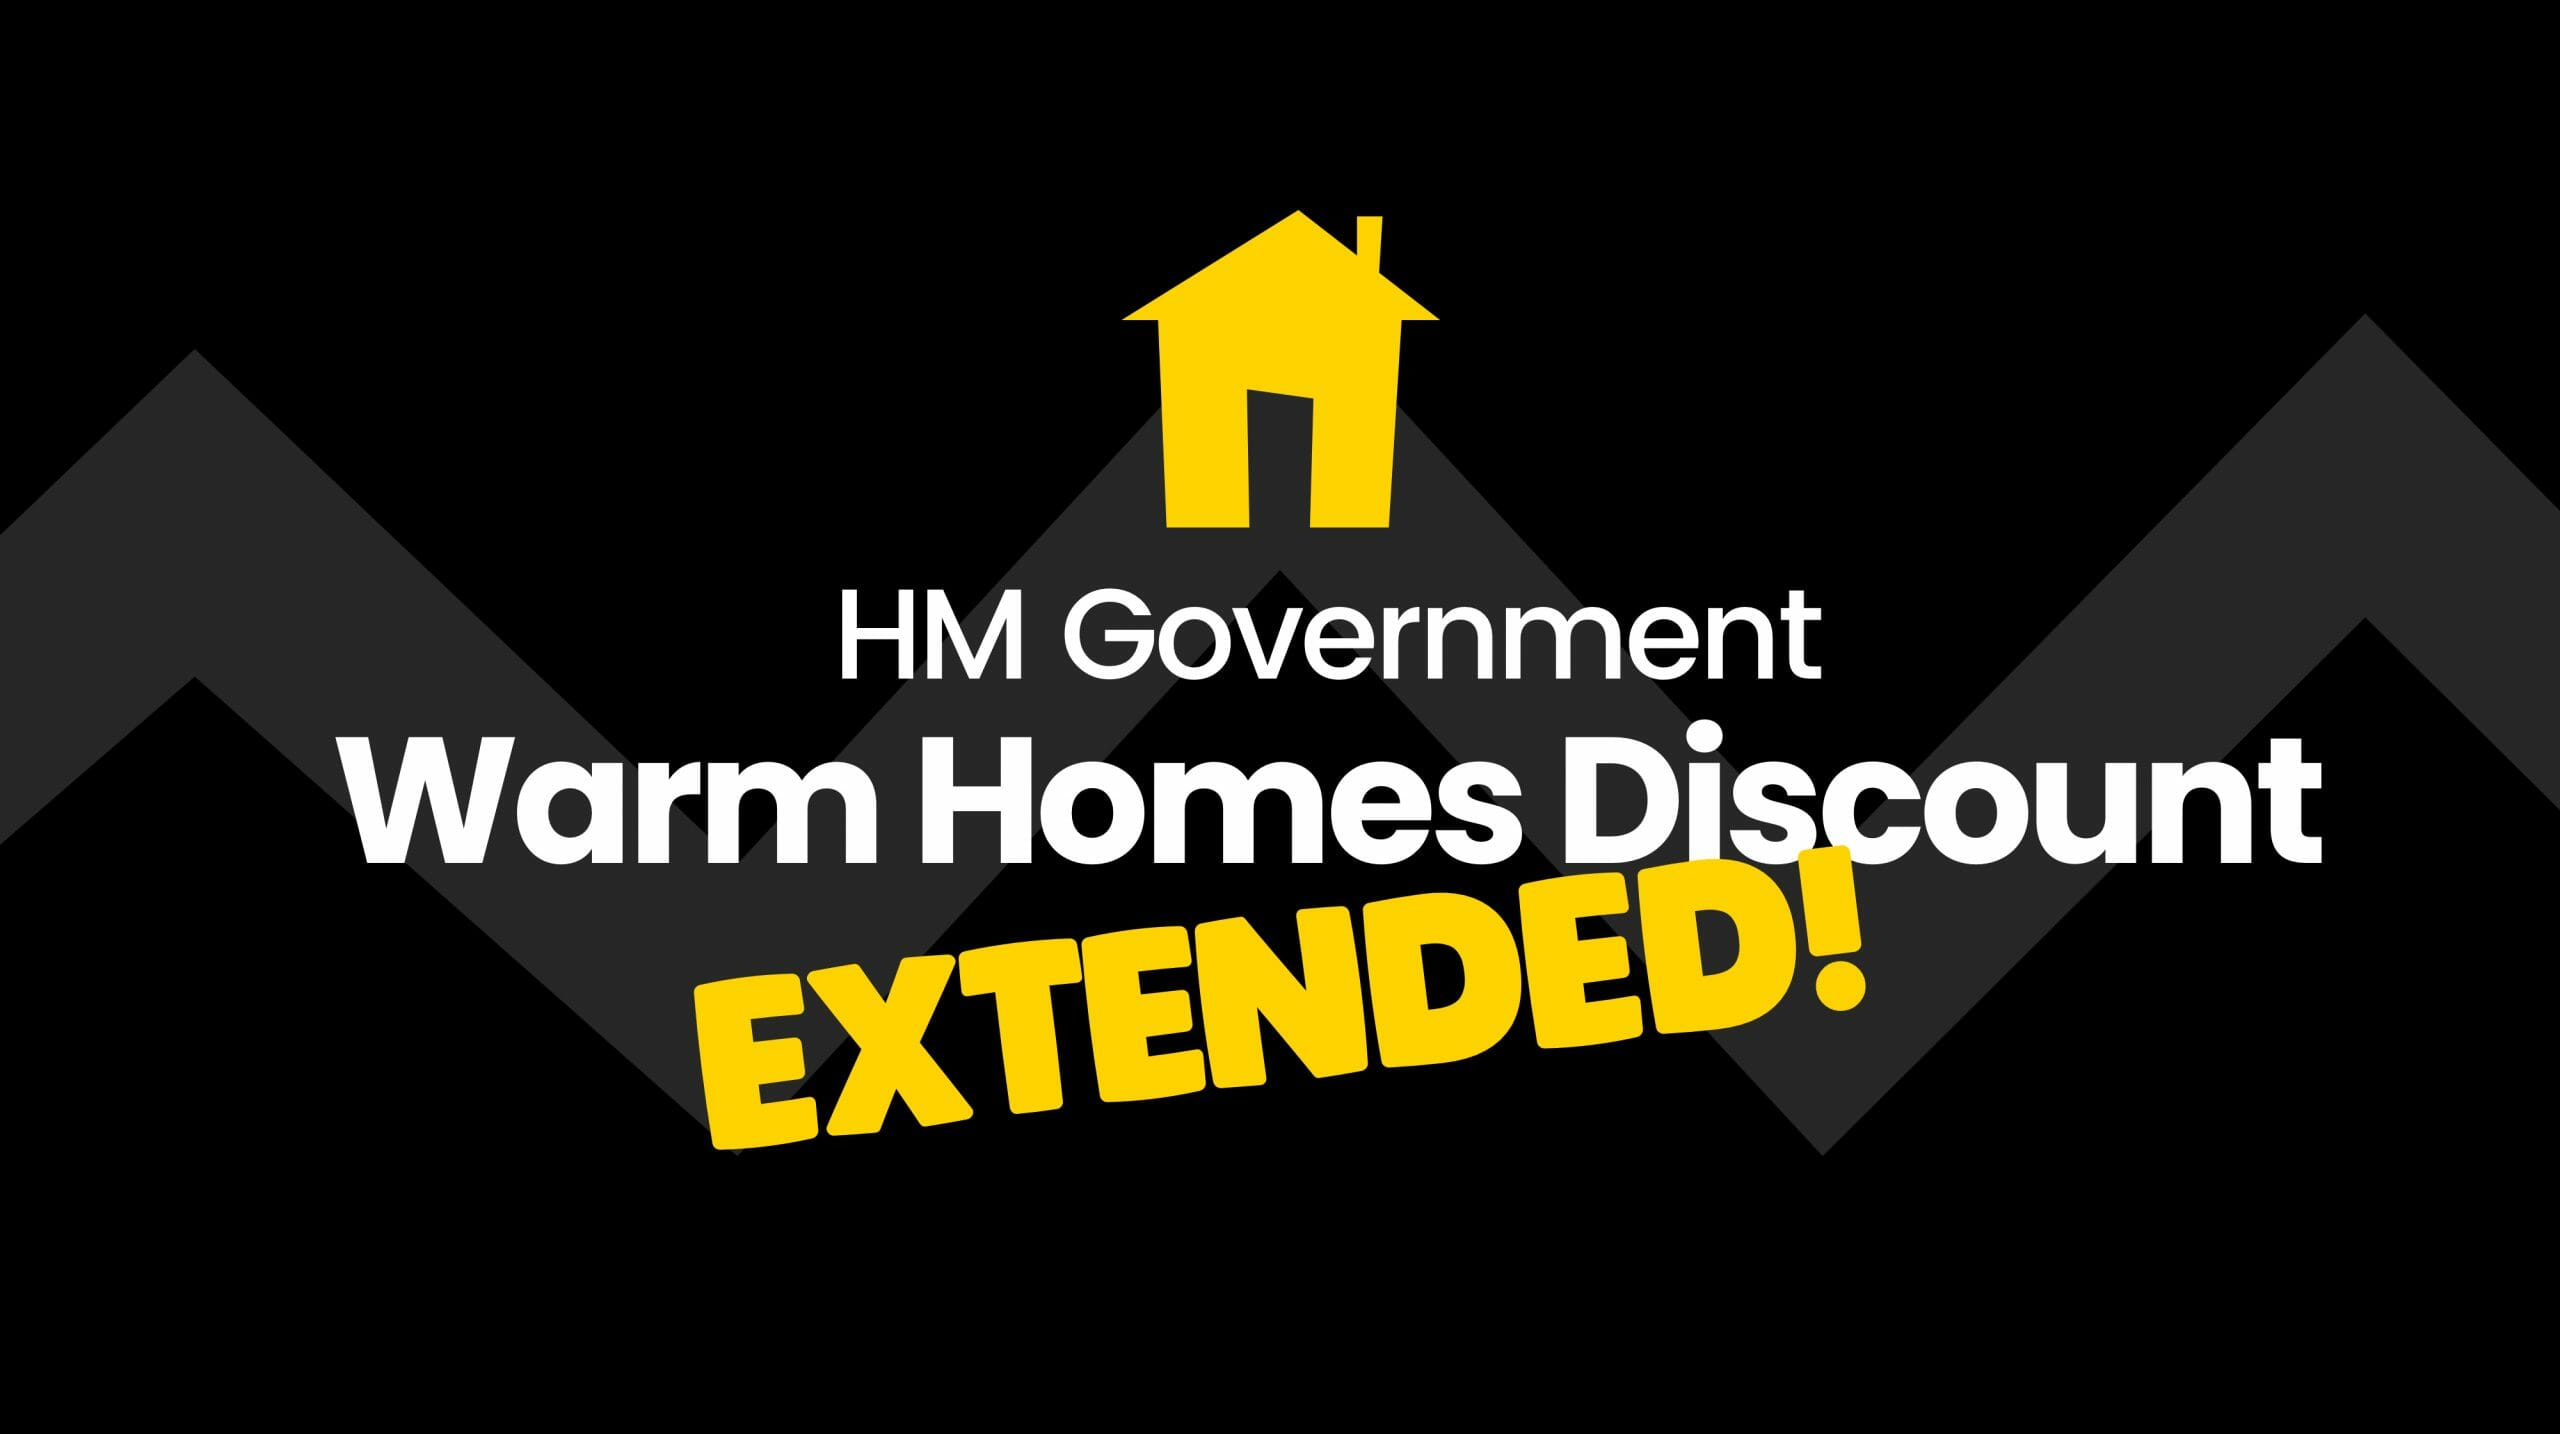 Relief for millions as Warm Home Discount extended Featured Image